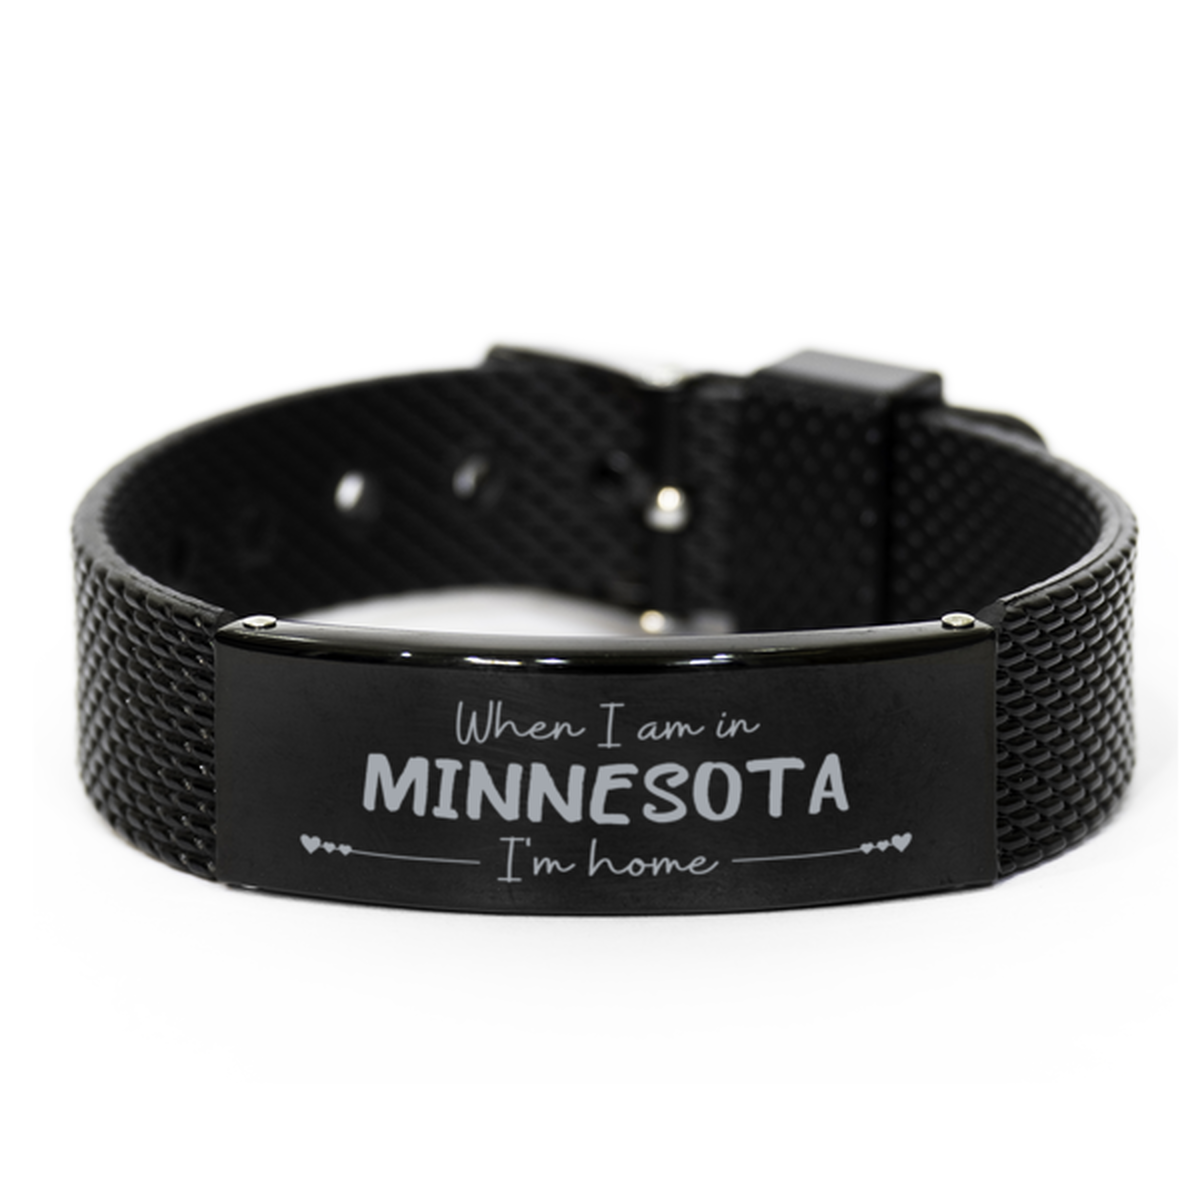 When I am in Minnesota I'm home Black Shark Mesh Bracelet, Cheap Gifts For Minnesota, State Minnesota Birthday Gifts for Friends Coworker